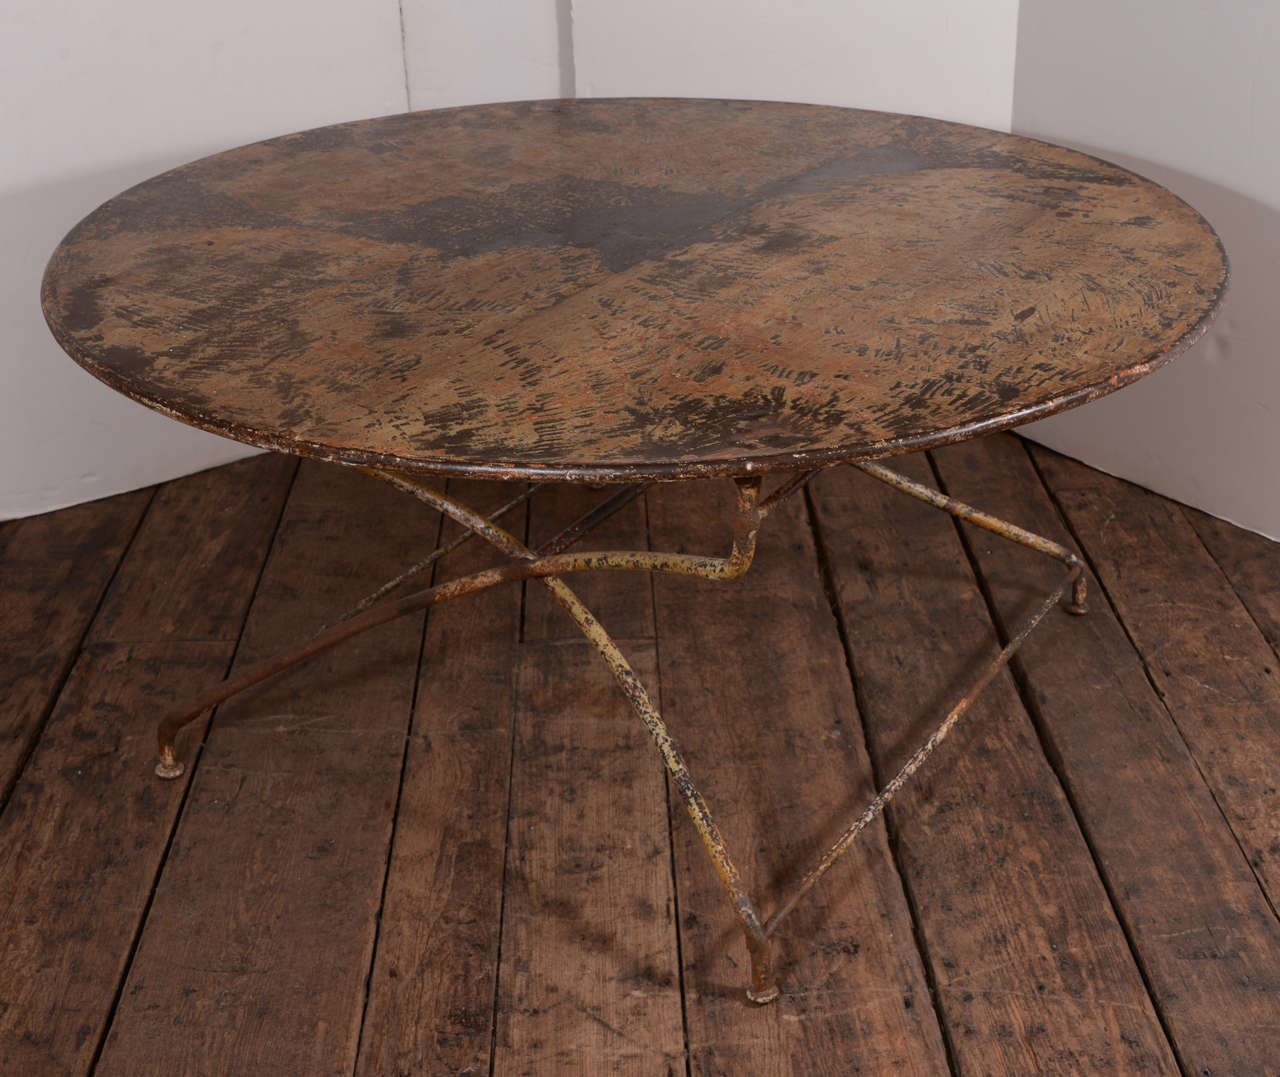 Fabulous round French iron table from the 19th century, great patina and form. Top is in perfect condition for everyday use. Folds easily for transportation.